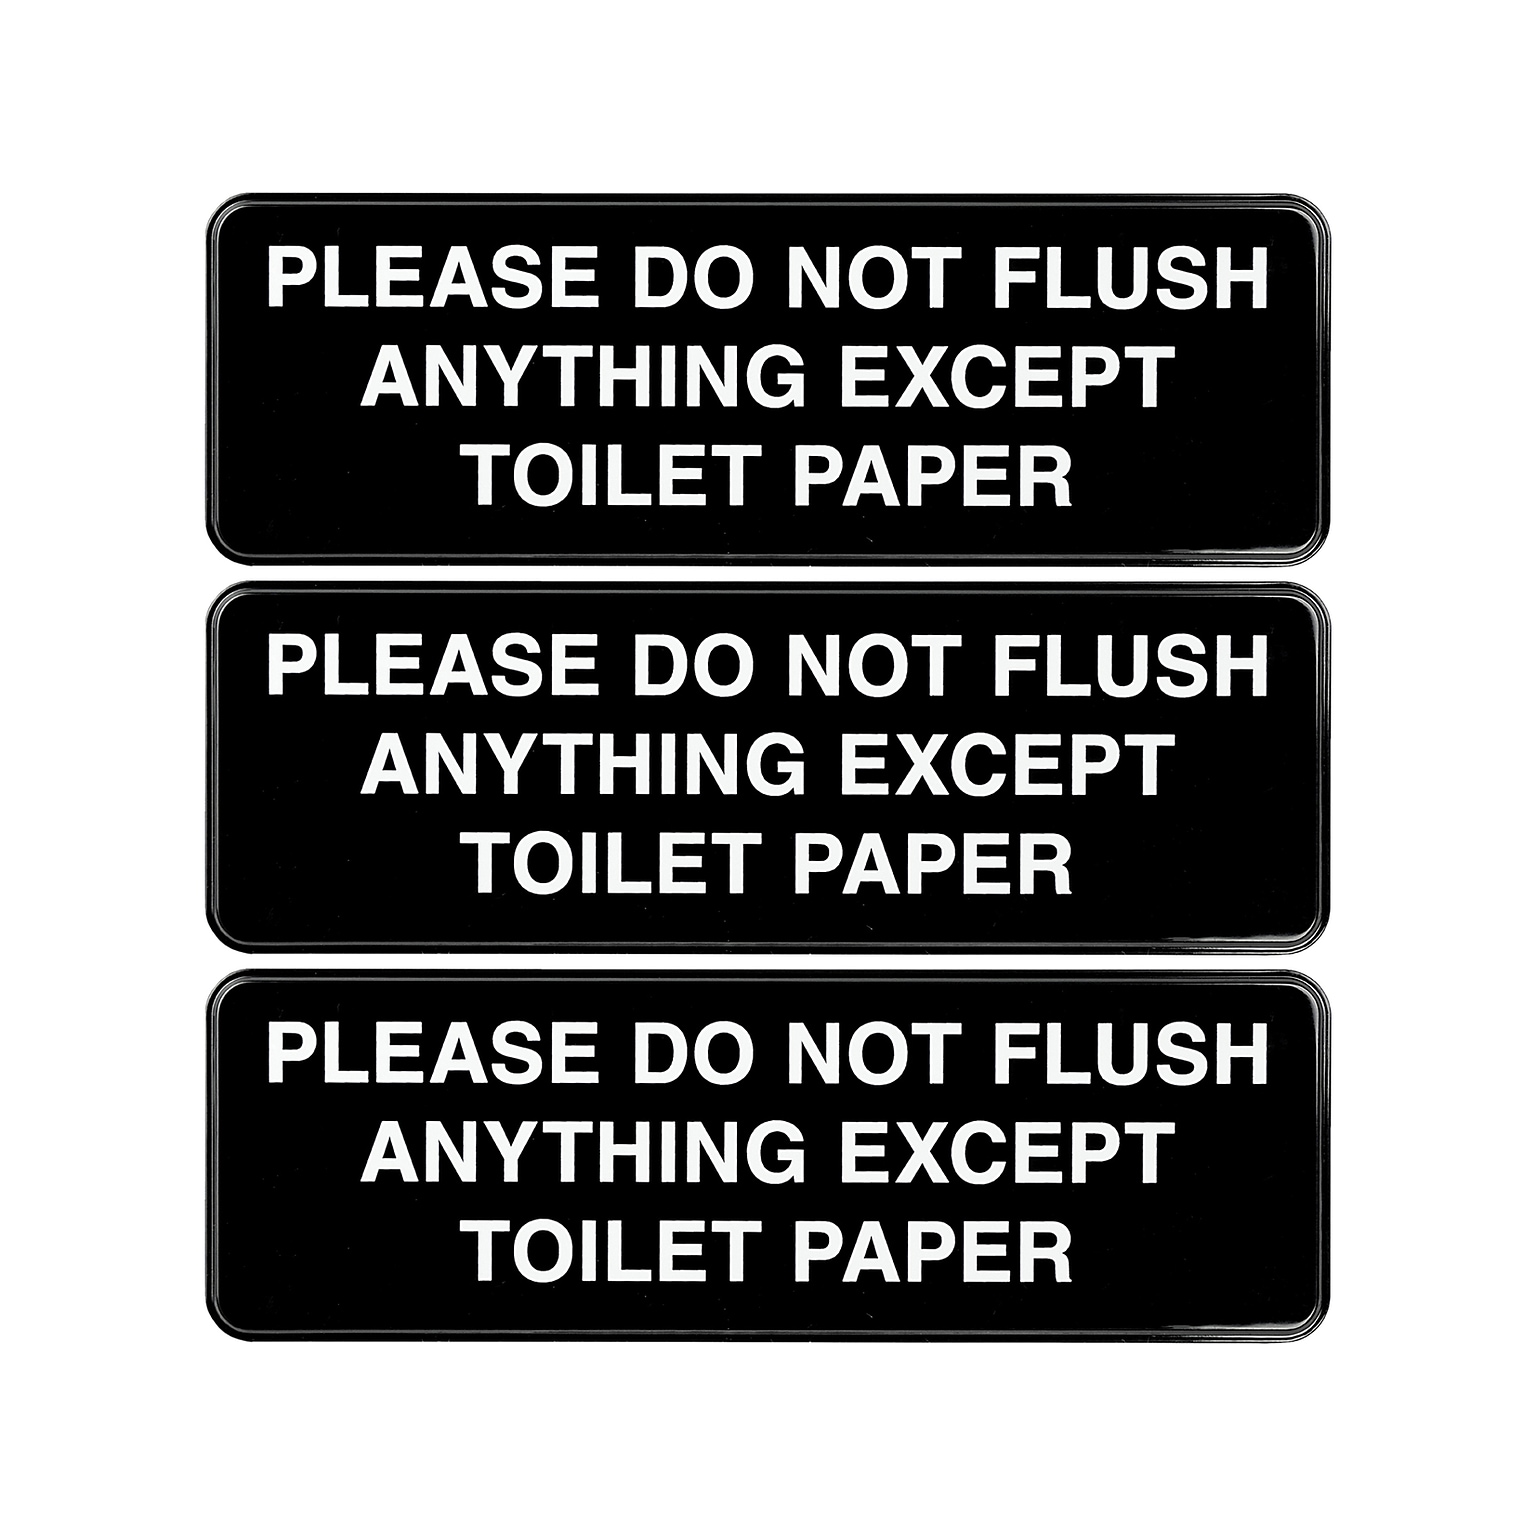 Excello Global Products Please Do Not Flush Indoor/Outdoor Wall Sign, 9 x 3, Black/White, 3/Pack (EGP-HD-0255-S)